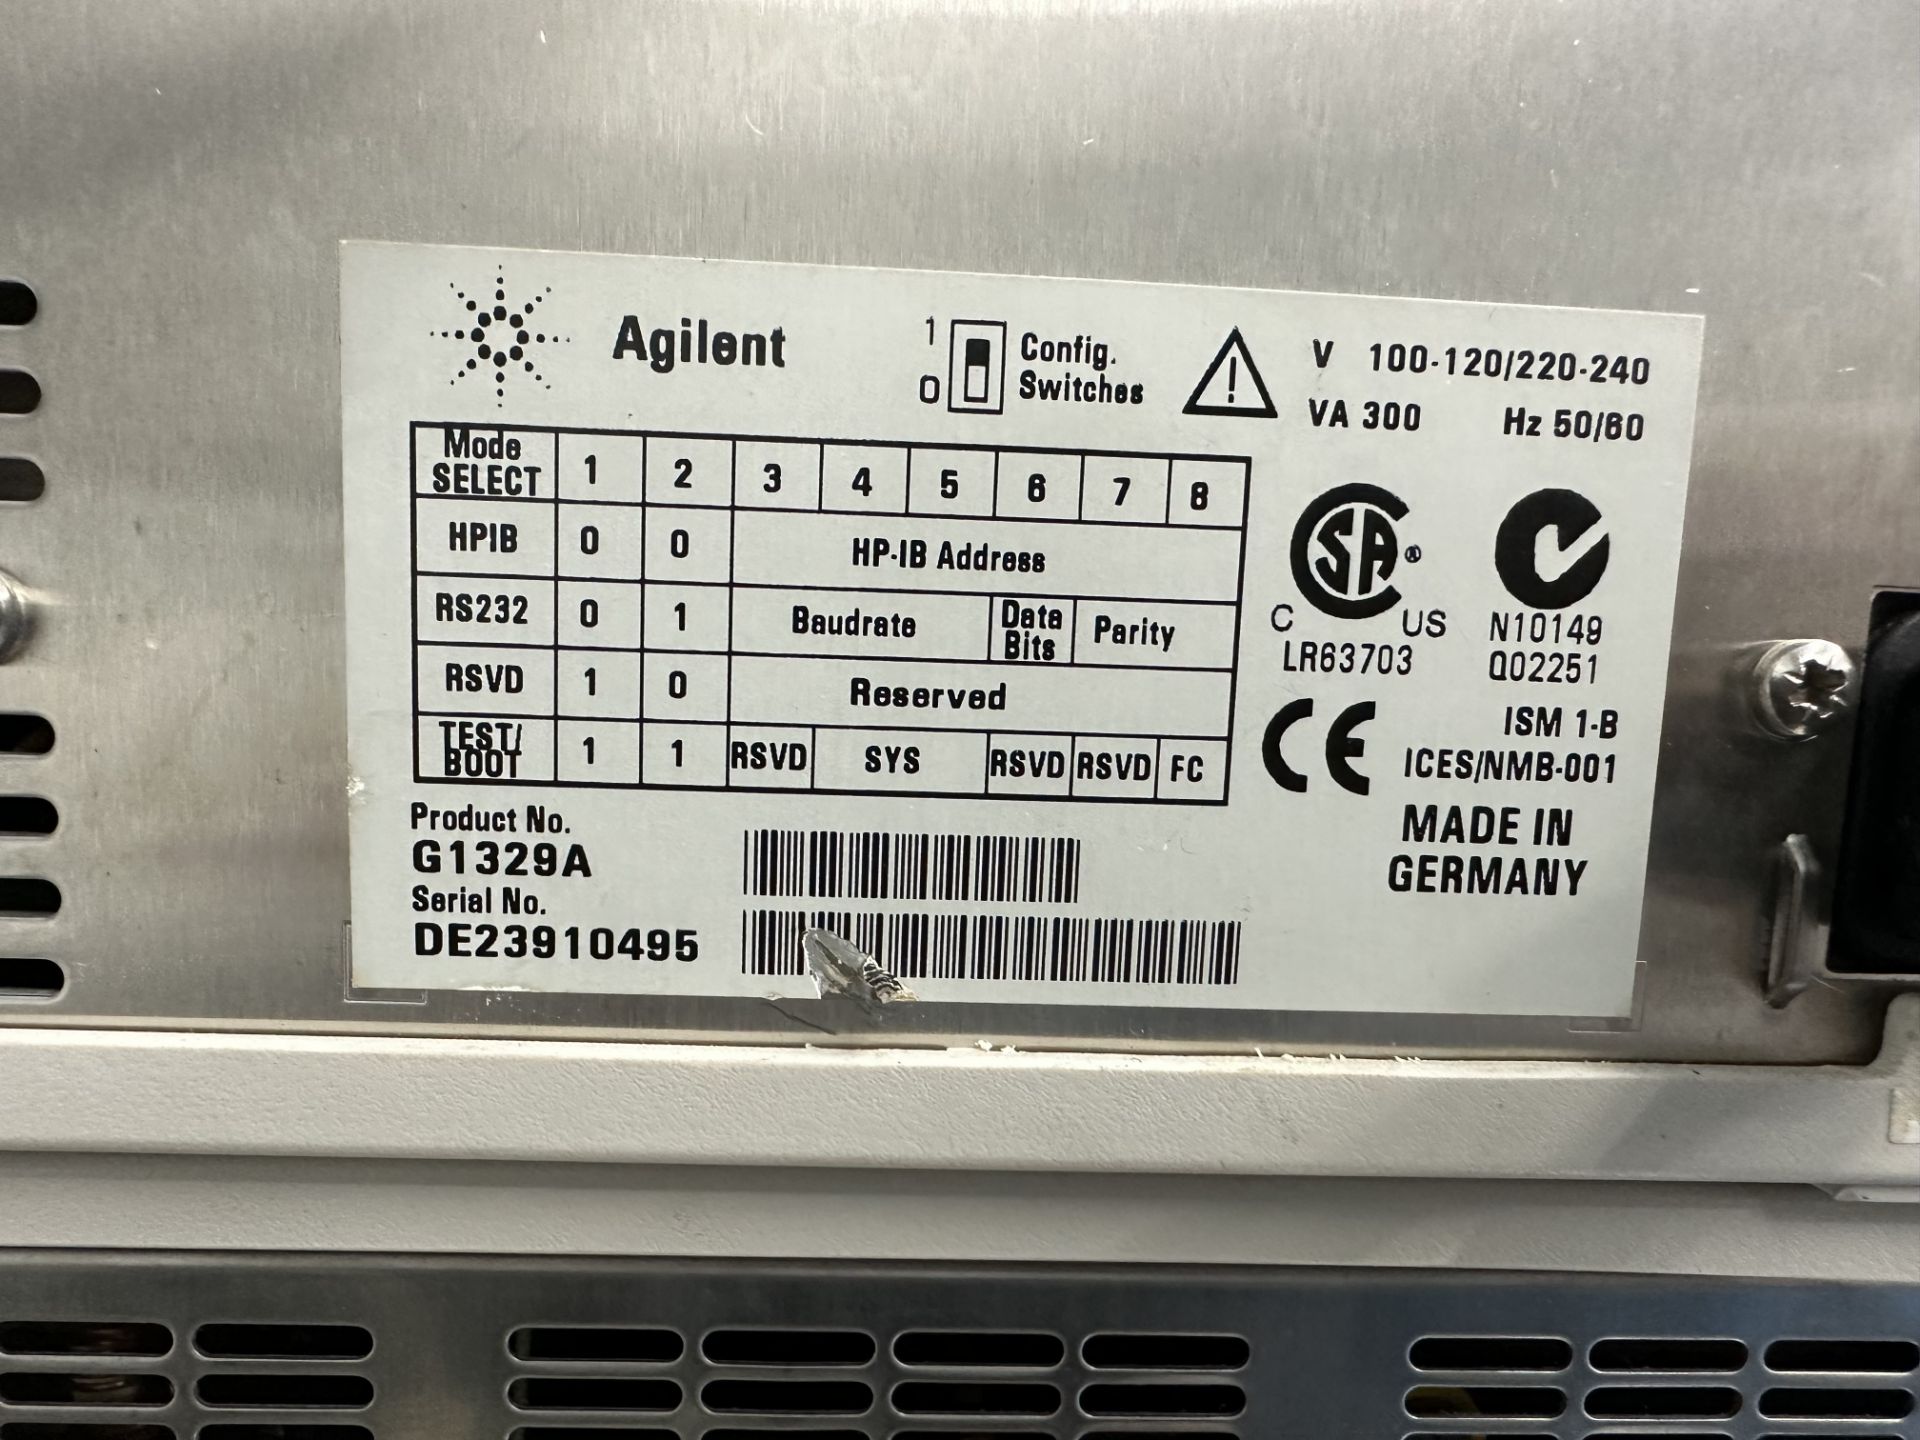 Used Agilent HP 1100 Series HPLC System. Model 1100 - Image 12 of 14